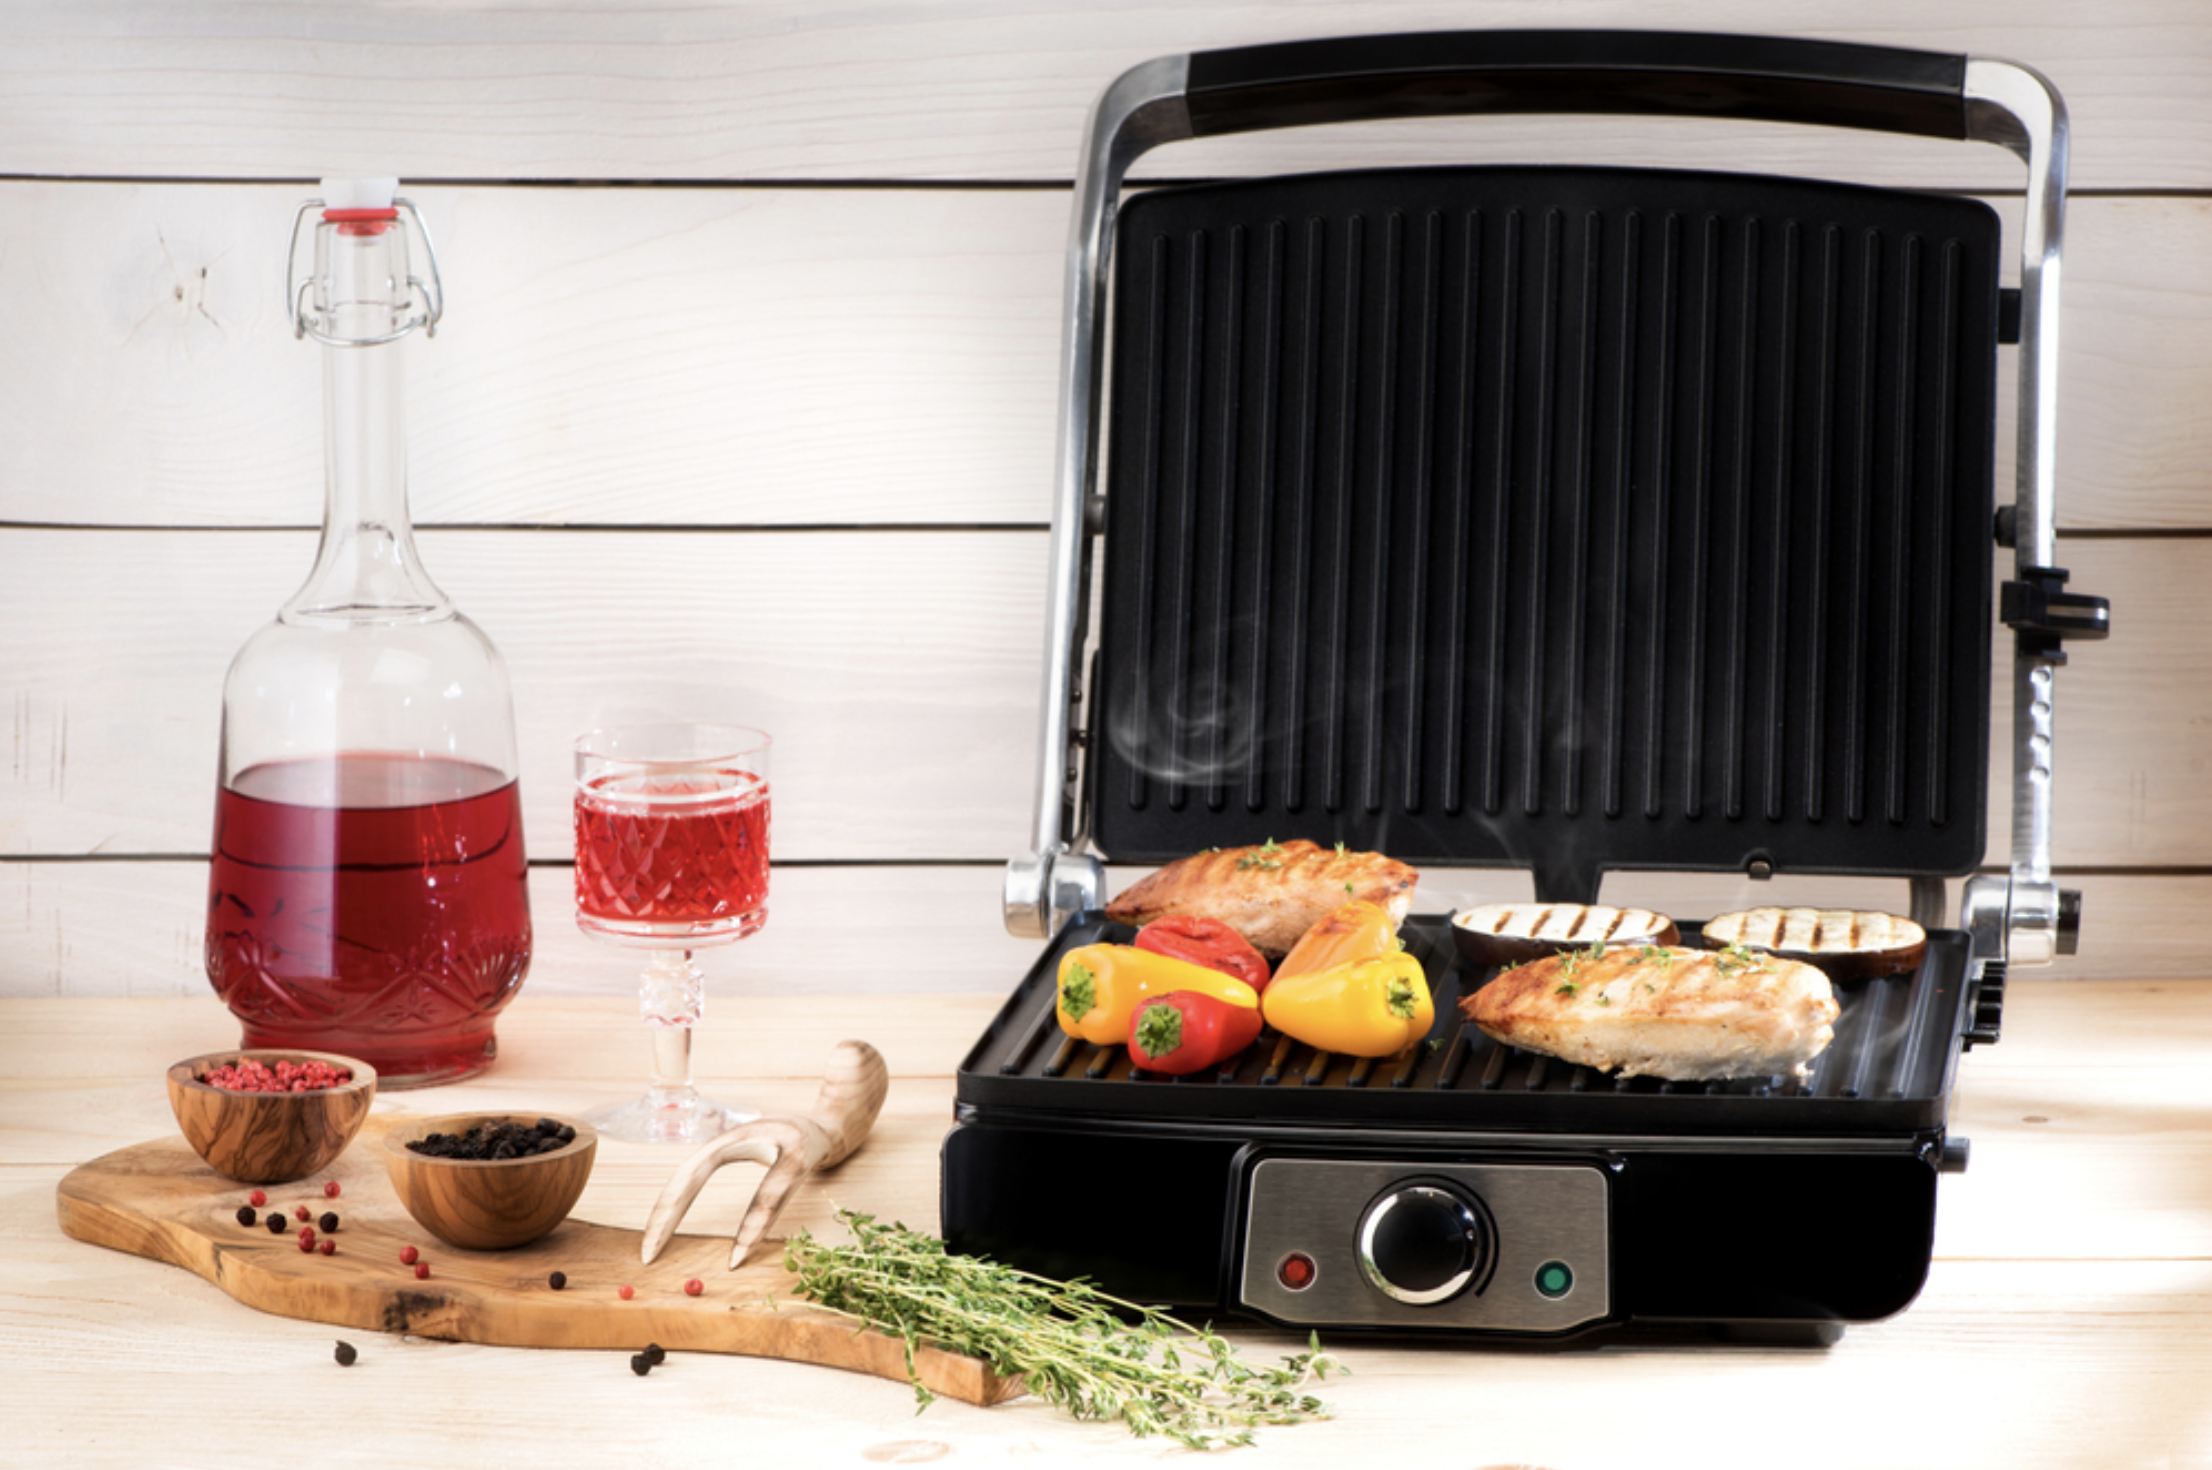 Electric grill is the safest choice for indoor grilling